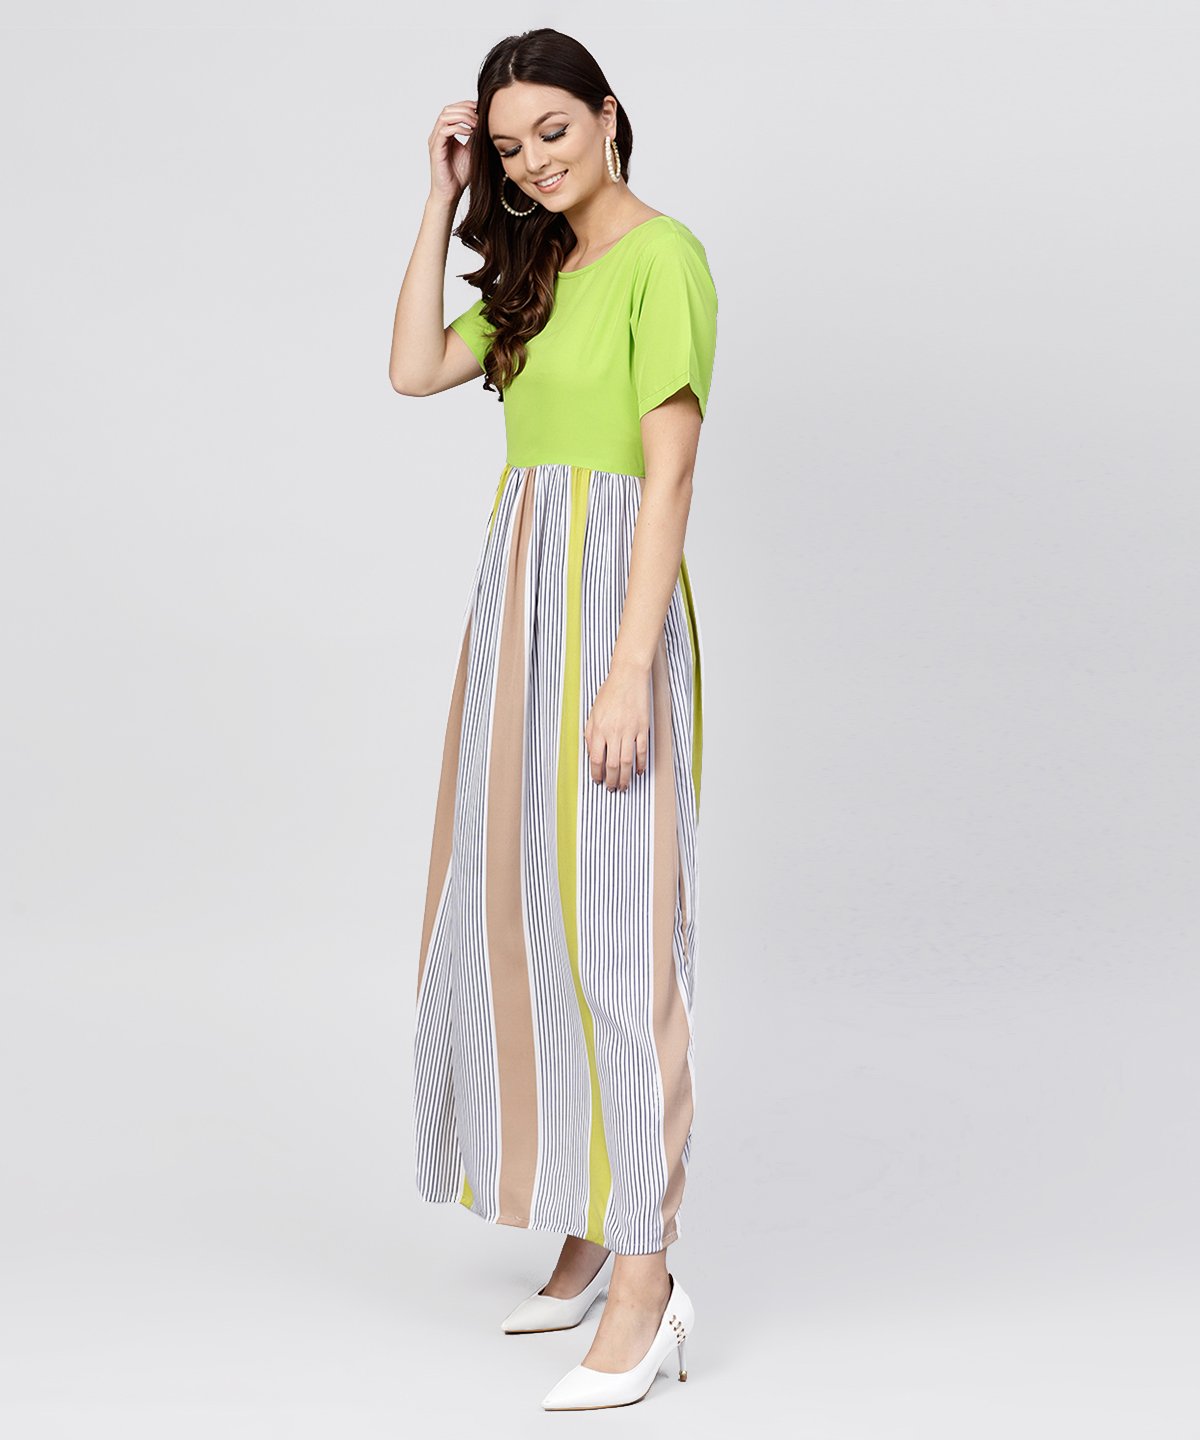 Women's Green Colored Maxi Dress With Round Neck And Half Sleeves - Nayo Clothing